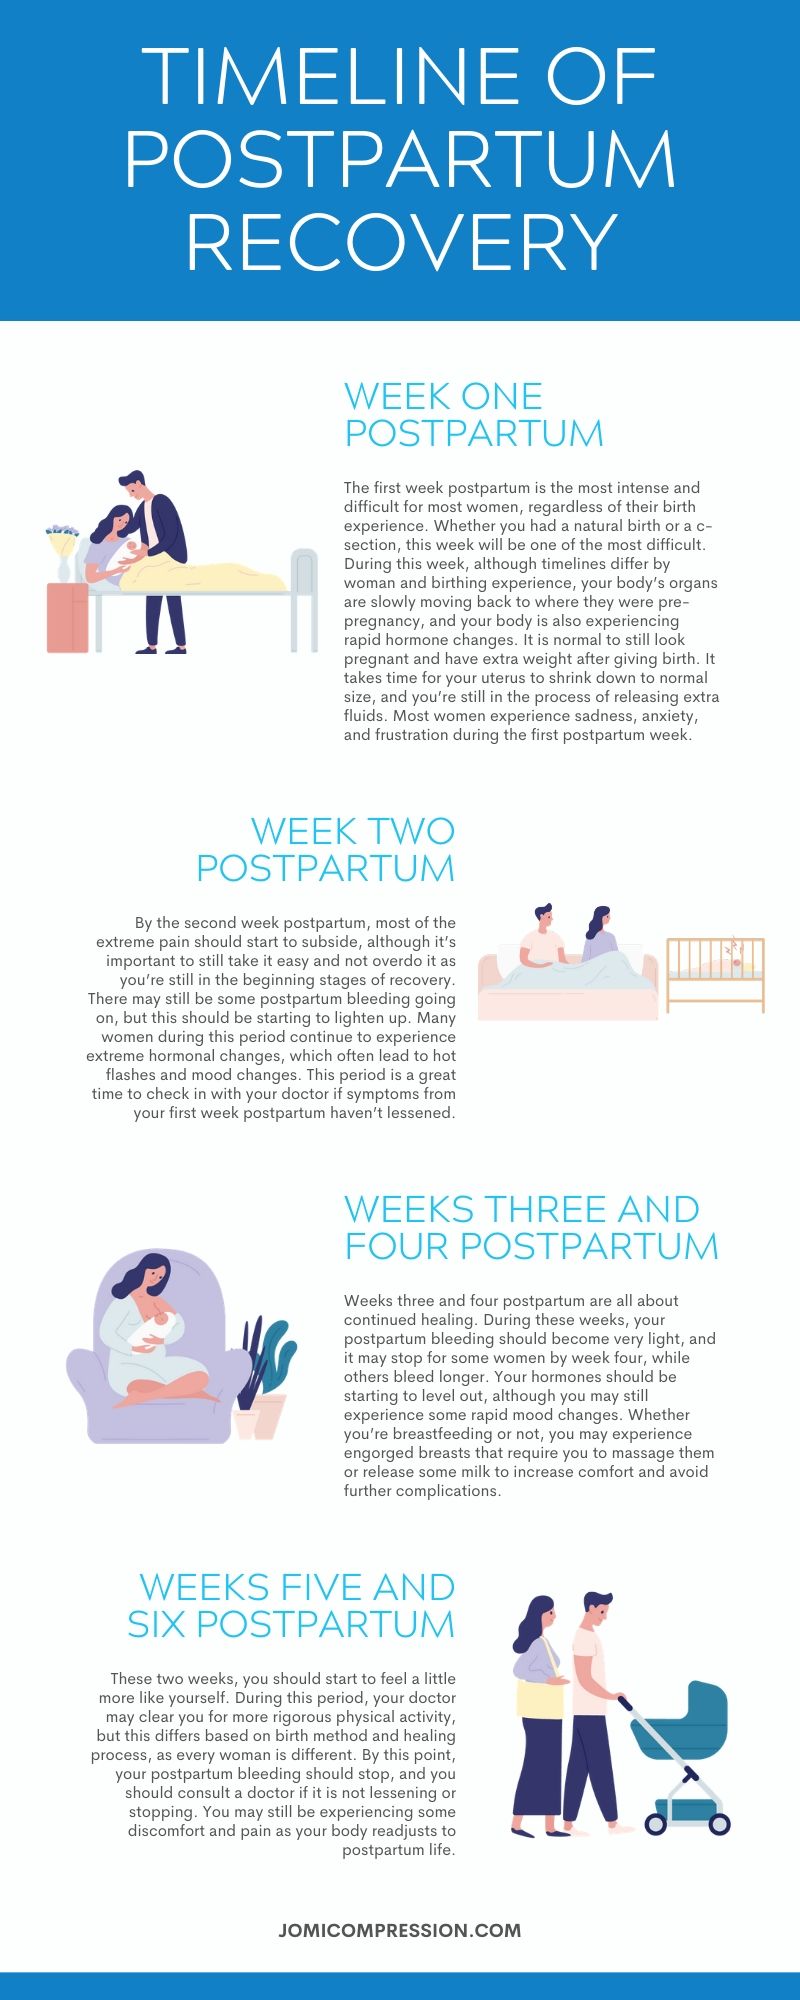 Timeline of Postpartum Recovery